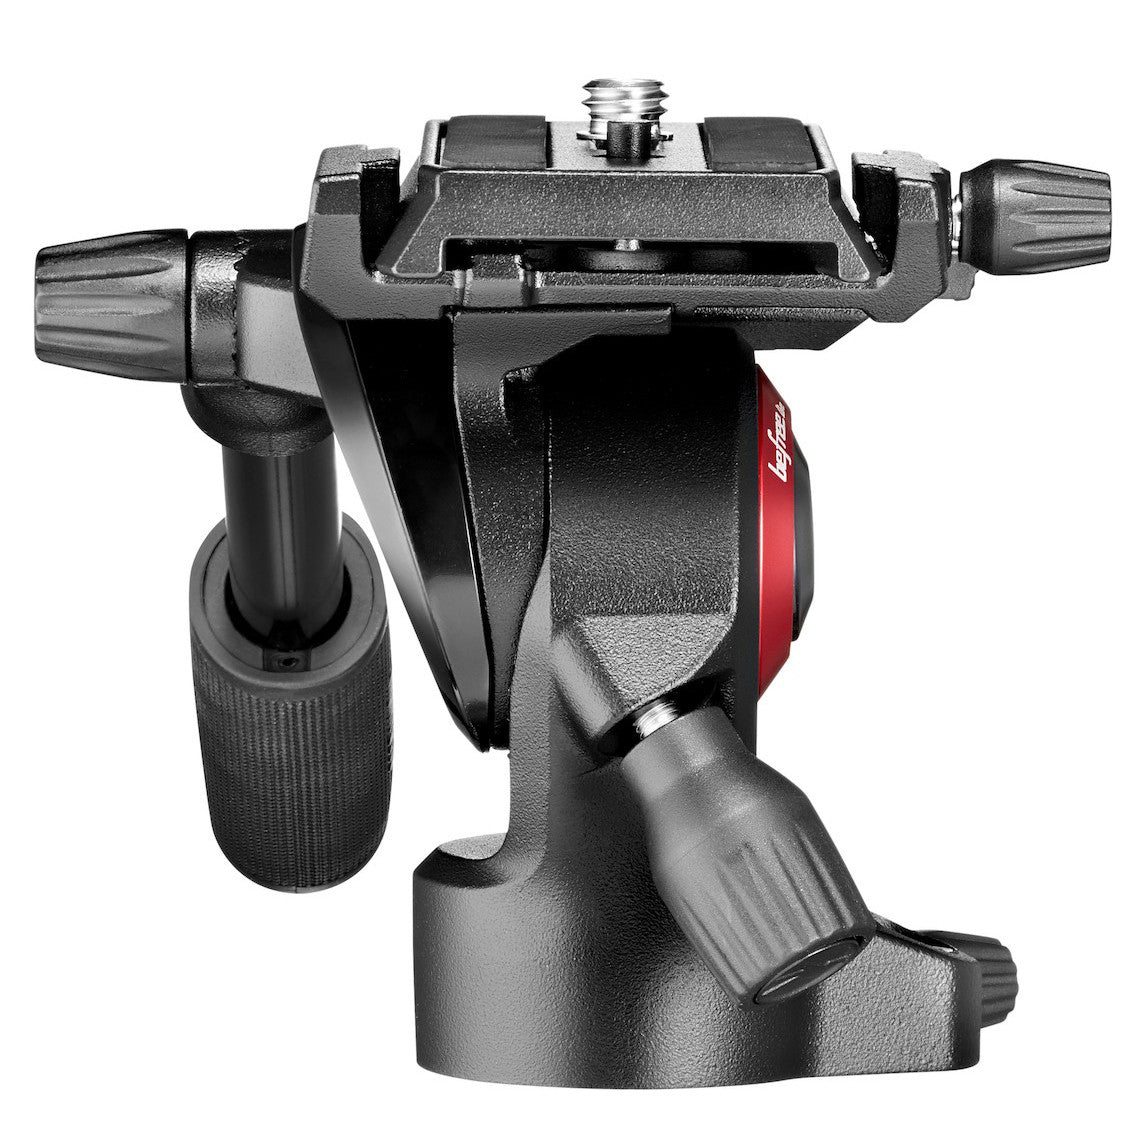 Shop for Manfrotto Befree Live Fluid Head | GOHUNT